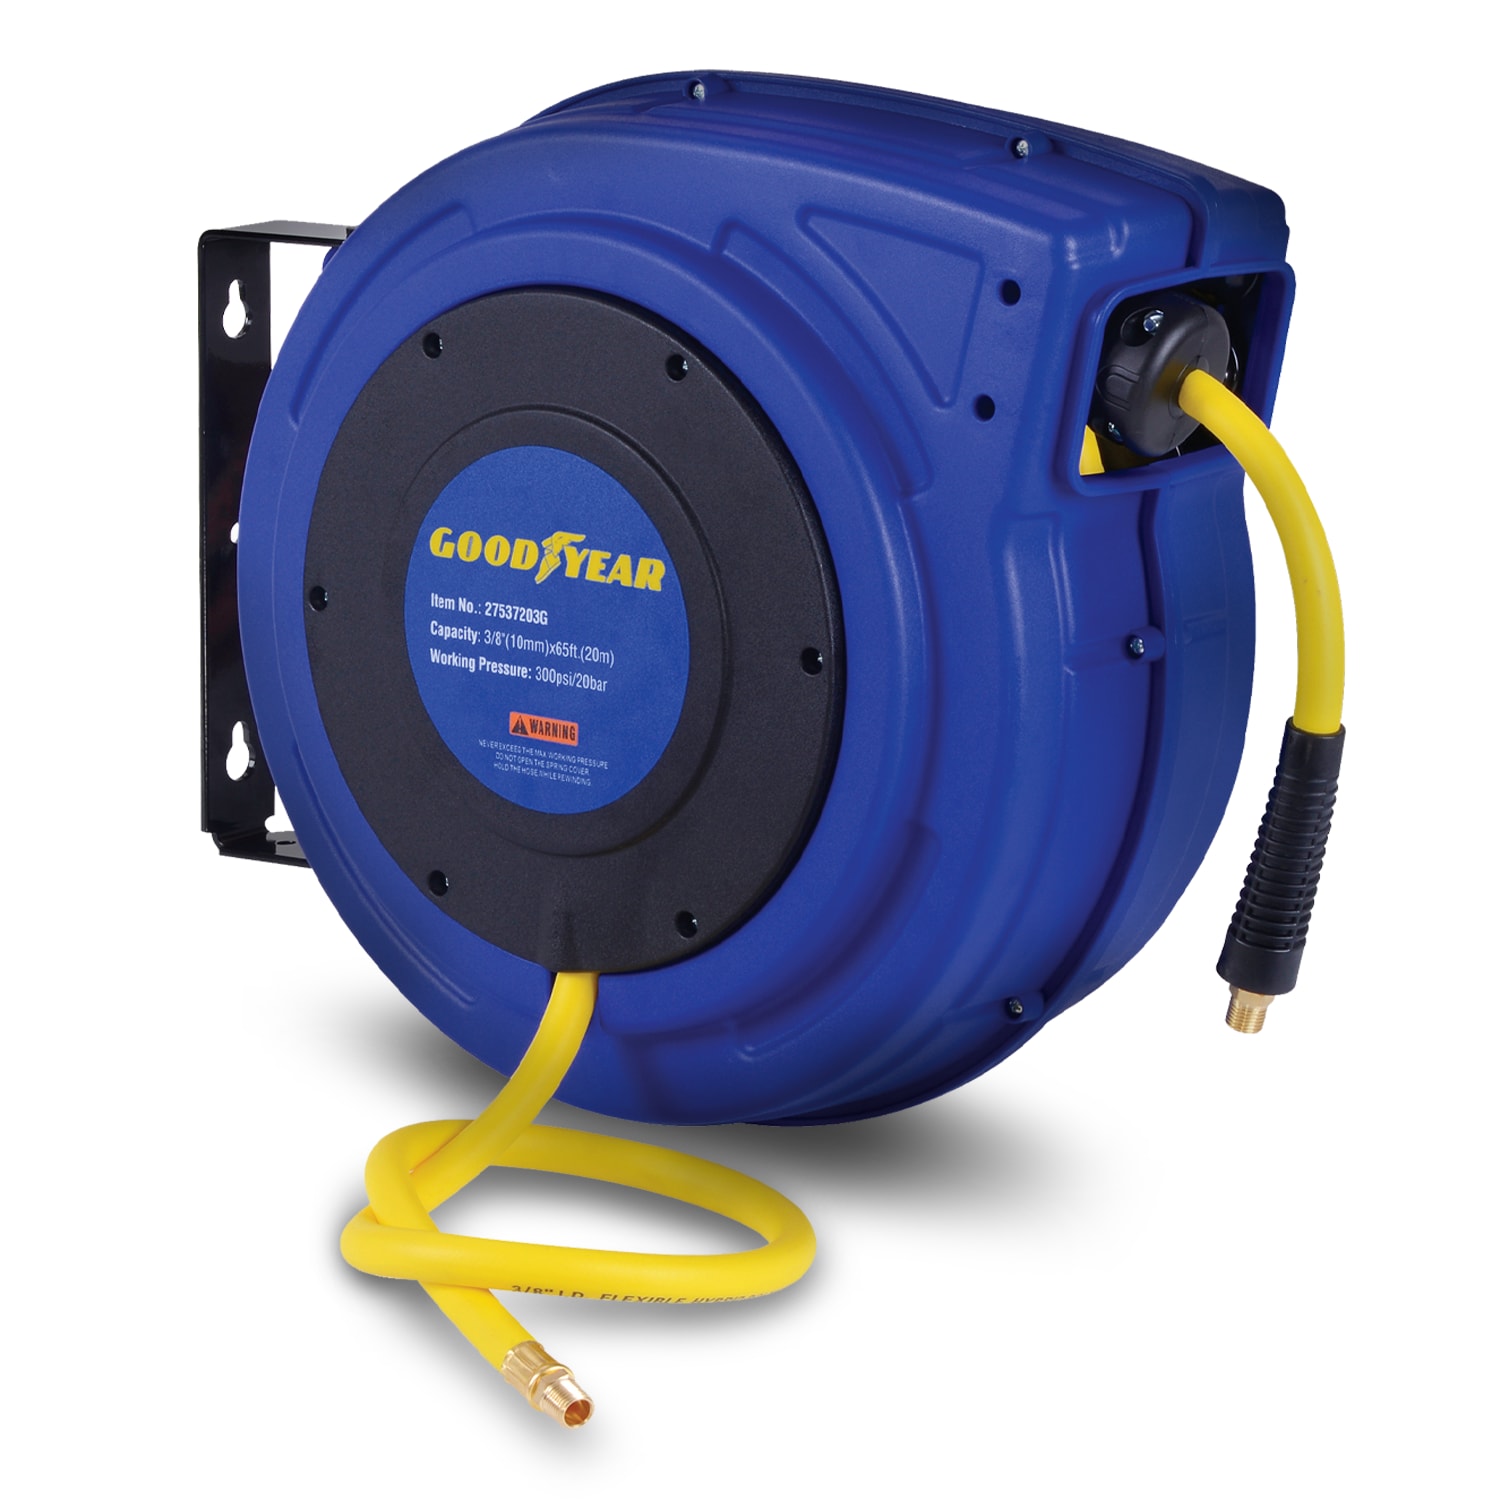 Goodyear Goodyear Mountable Retractable Air Hose Reel- 3/8in X 65ft, 3ft  Lead-in Hose, 1/4in Npt Connections in the Air Compressor Hoses department  at